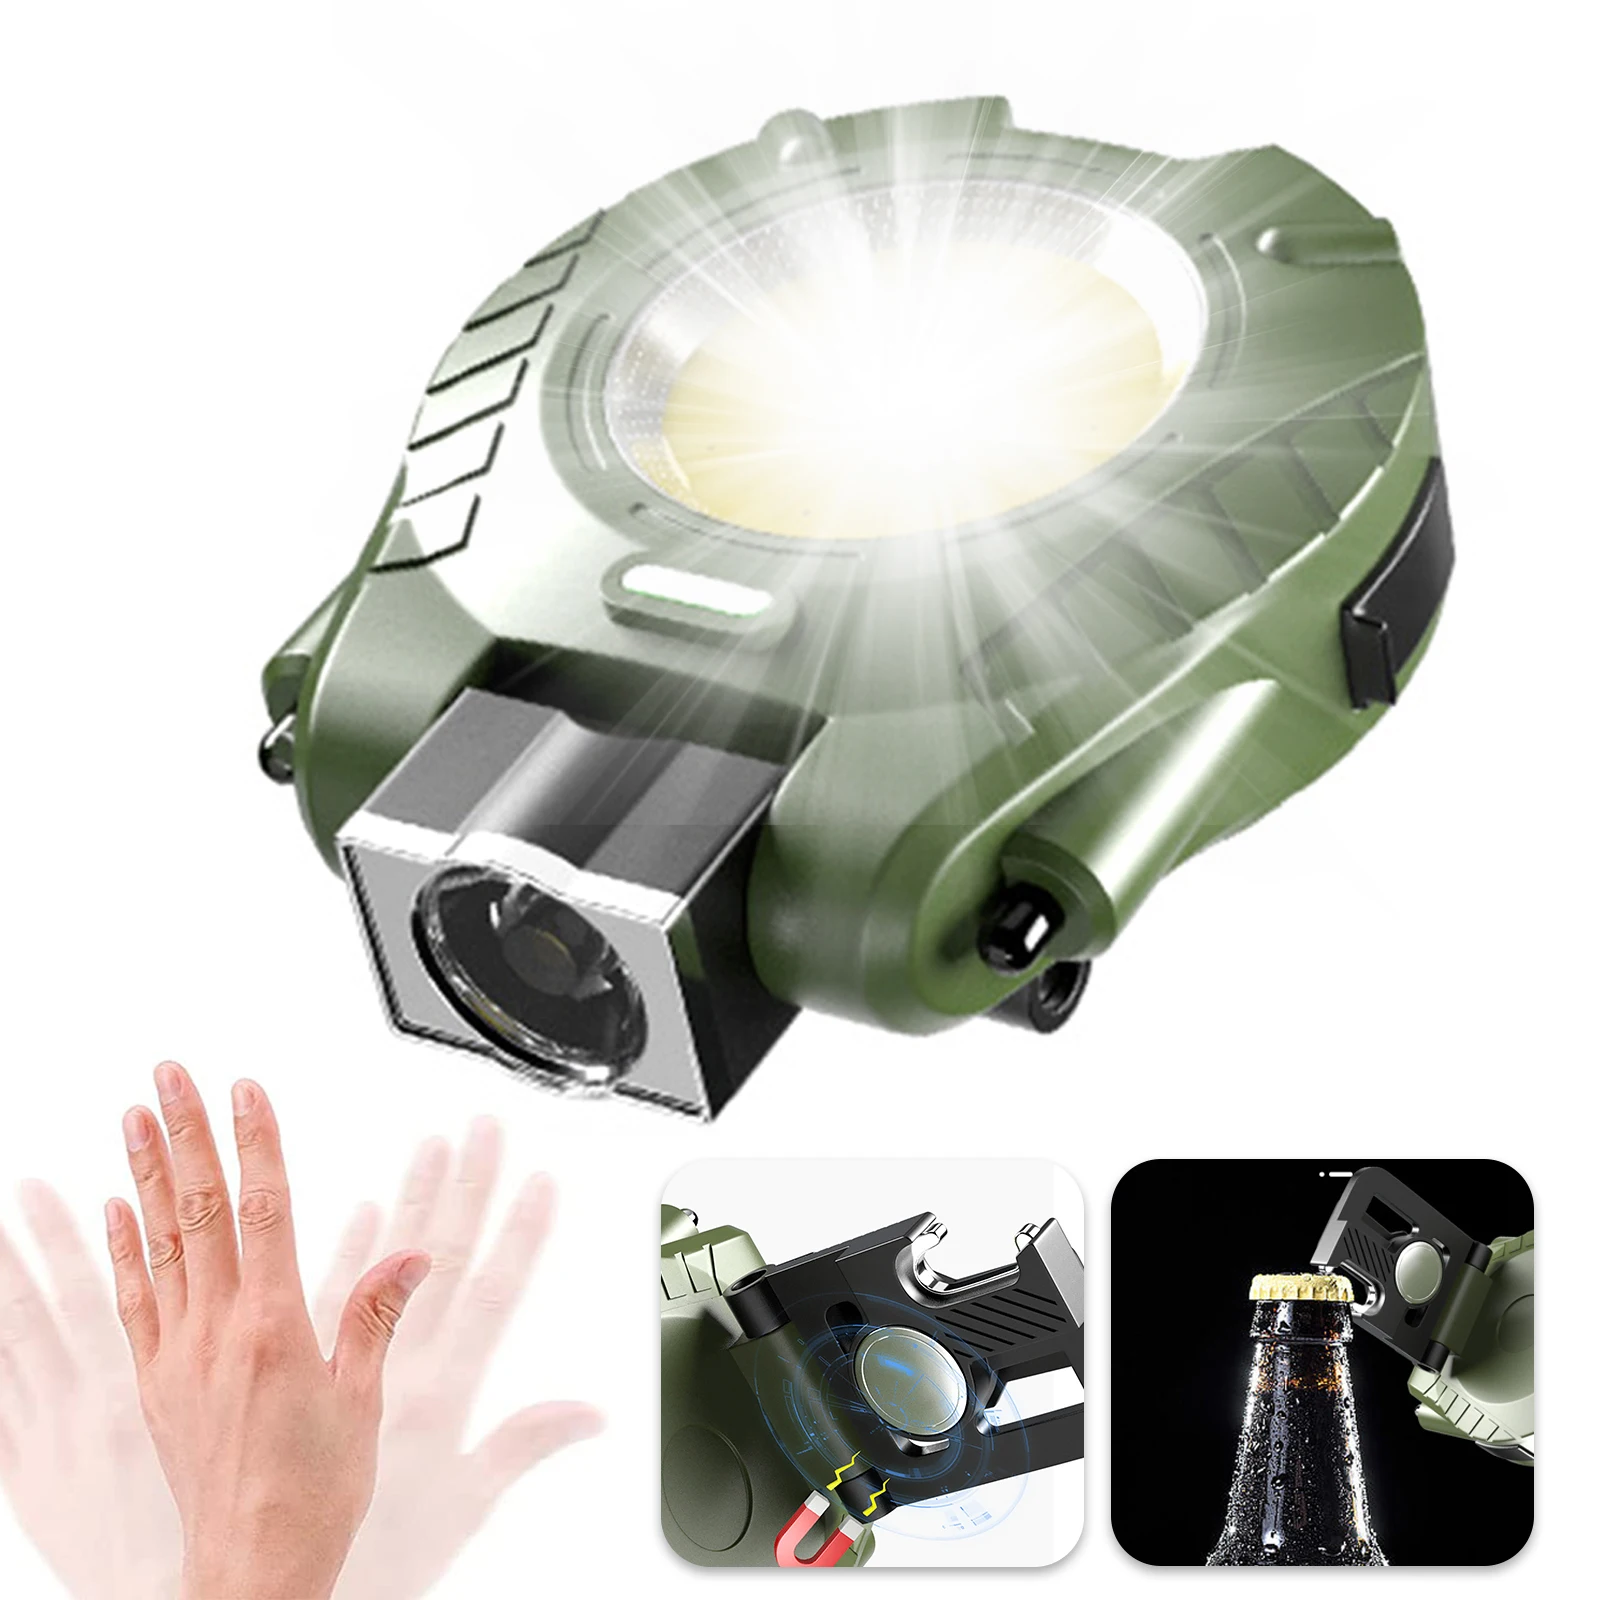 

USB Head Light Torch 3.7V 500mAh LED+COB Emergency Light Torches Strong Magnet 4 Modes IPX4 Waterproof for Night Fishing Cycling